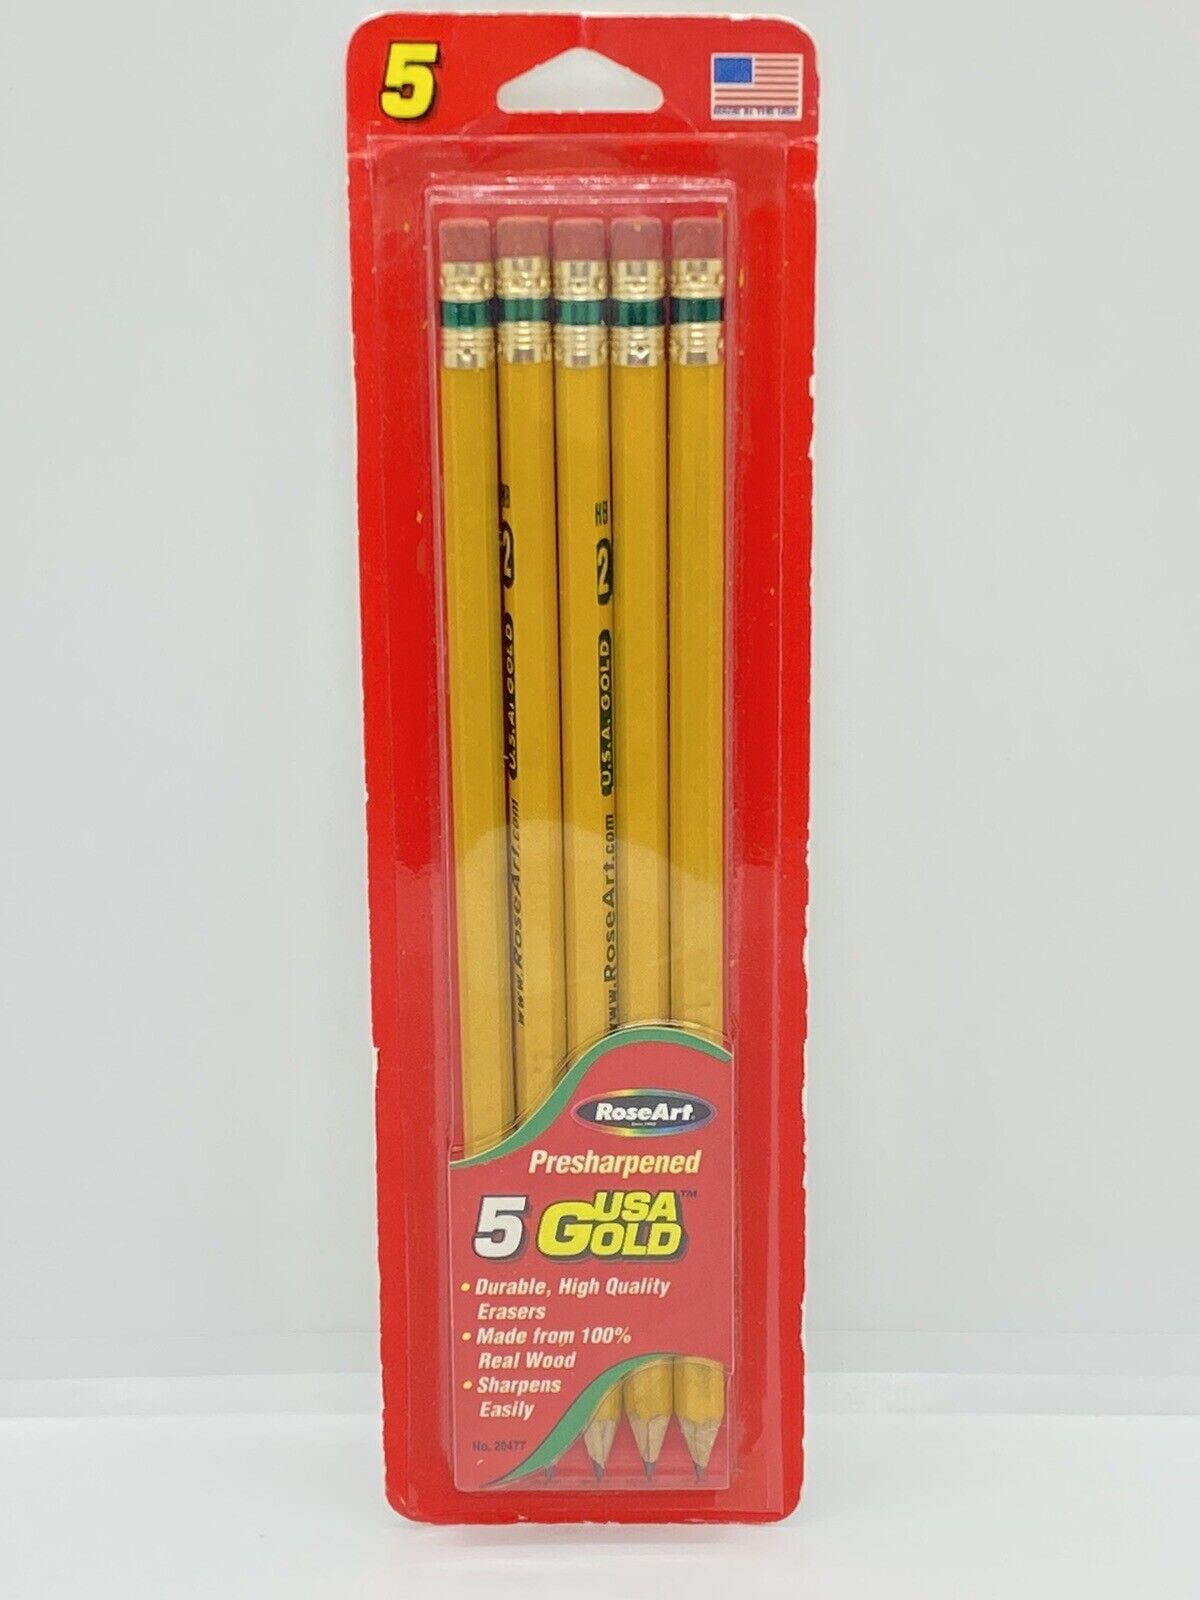 Vintage Rose Art #2 Yellow Pencils 5 Pack USA Gold